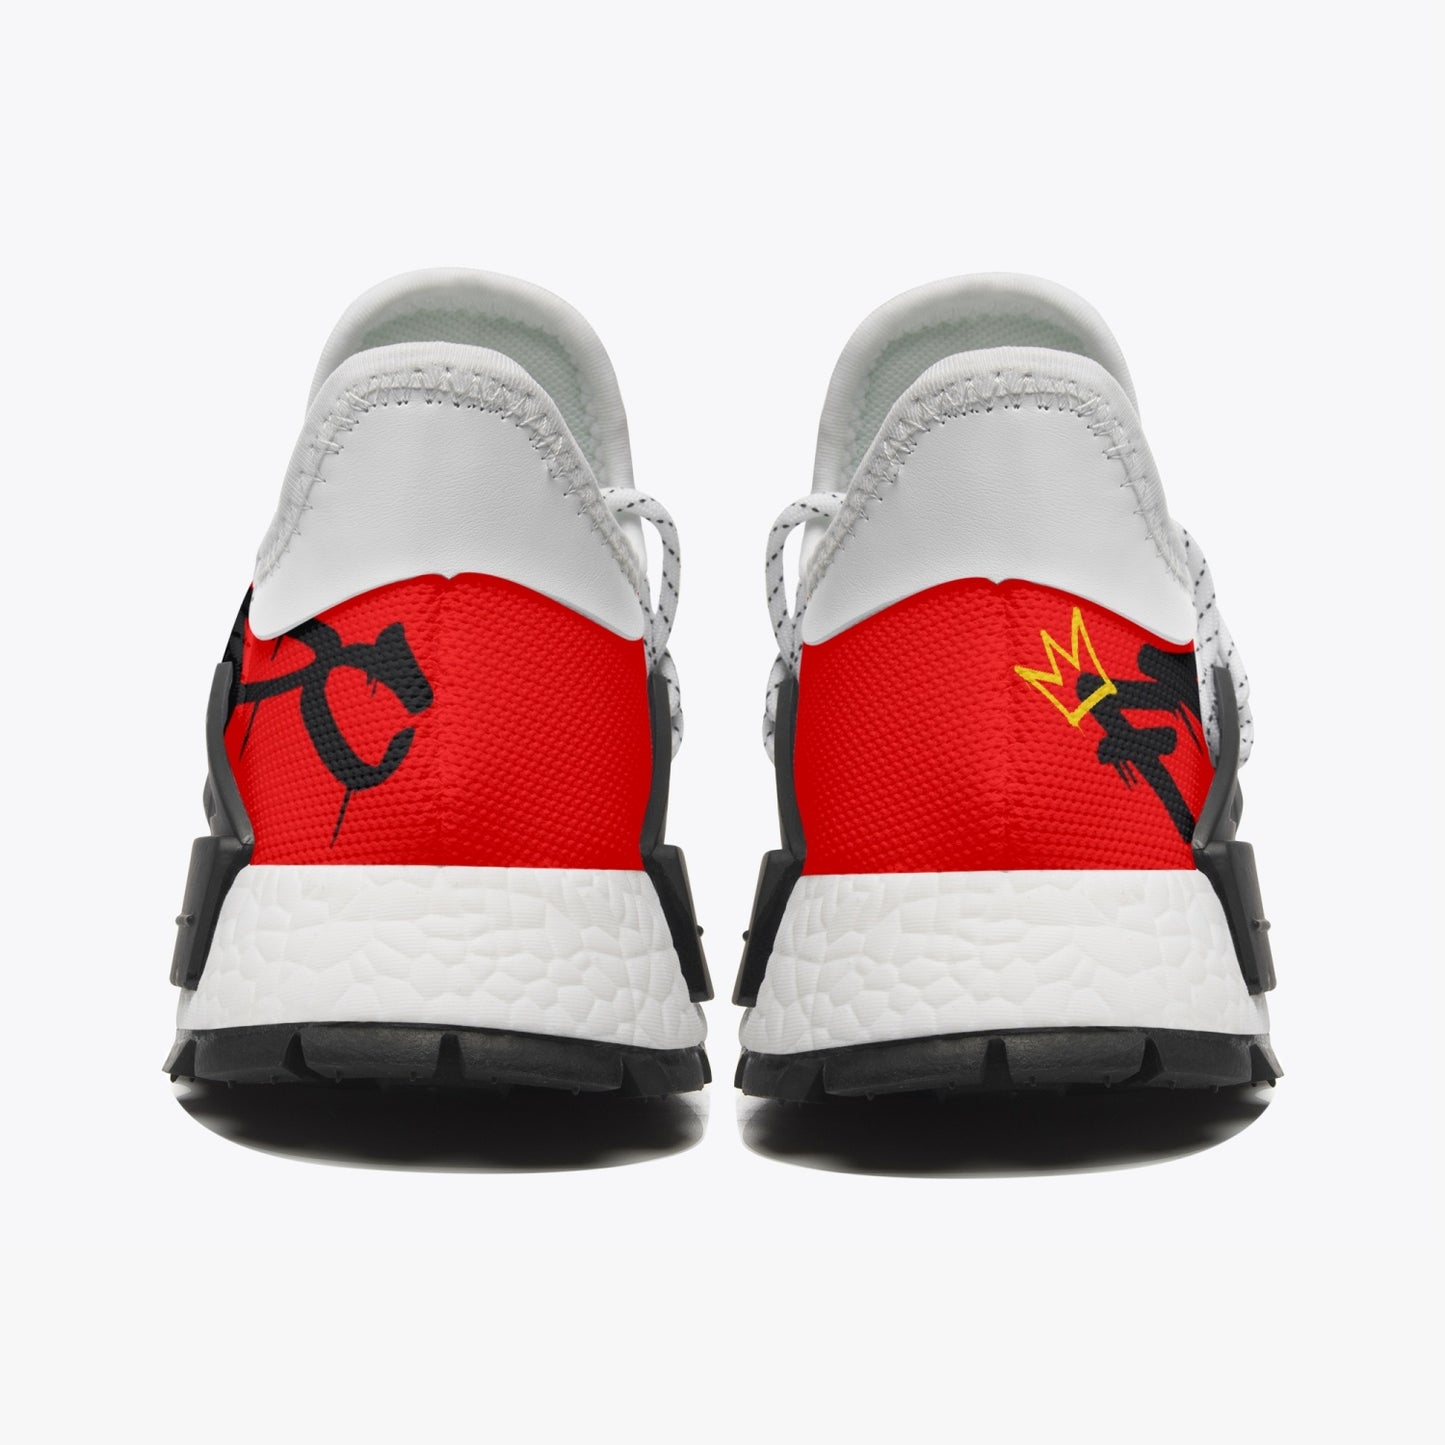 FPC Red Mesh Sneakers